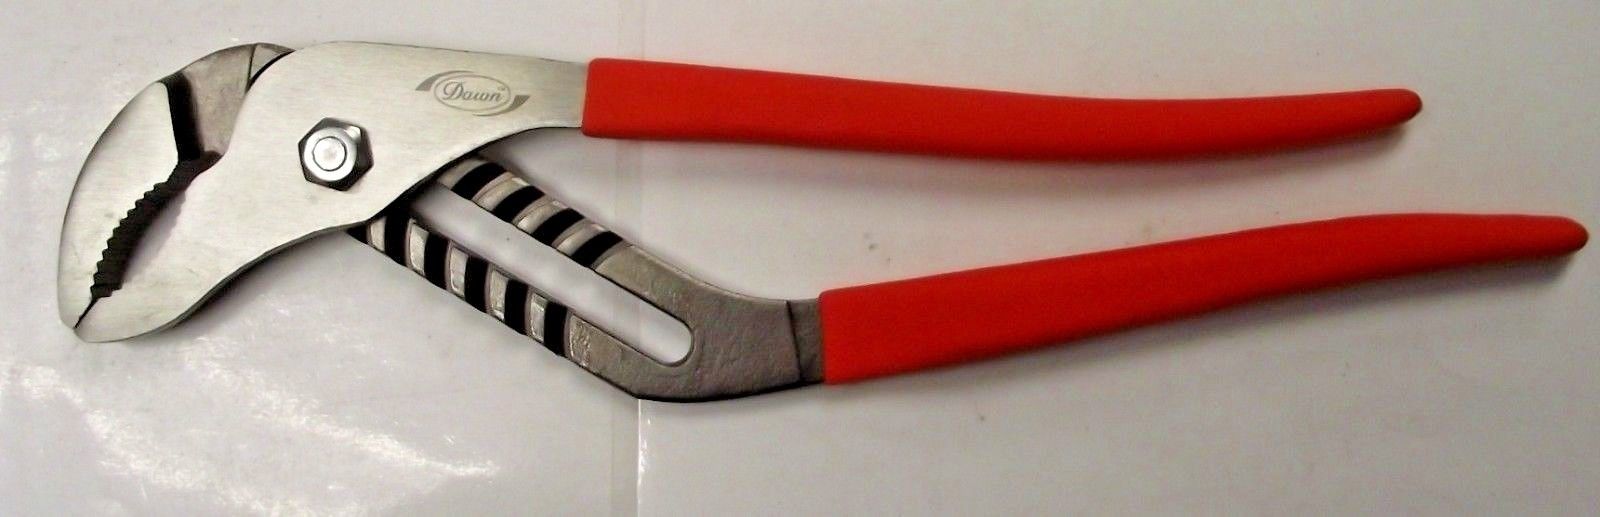 Dawn 15-3/4" Groove Joint Pliers 23107